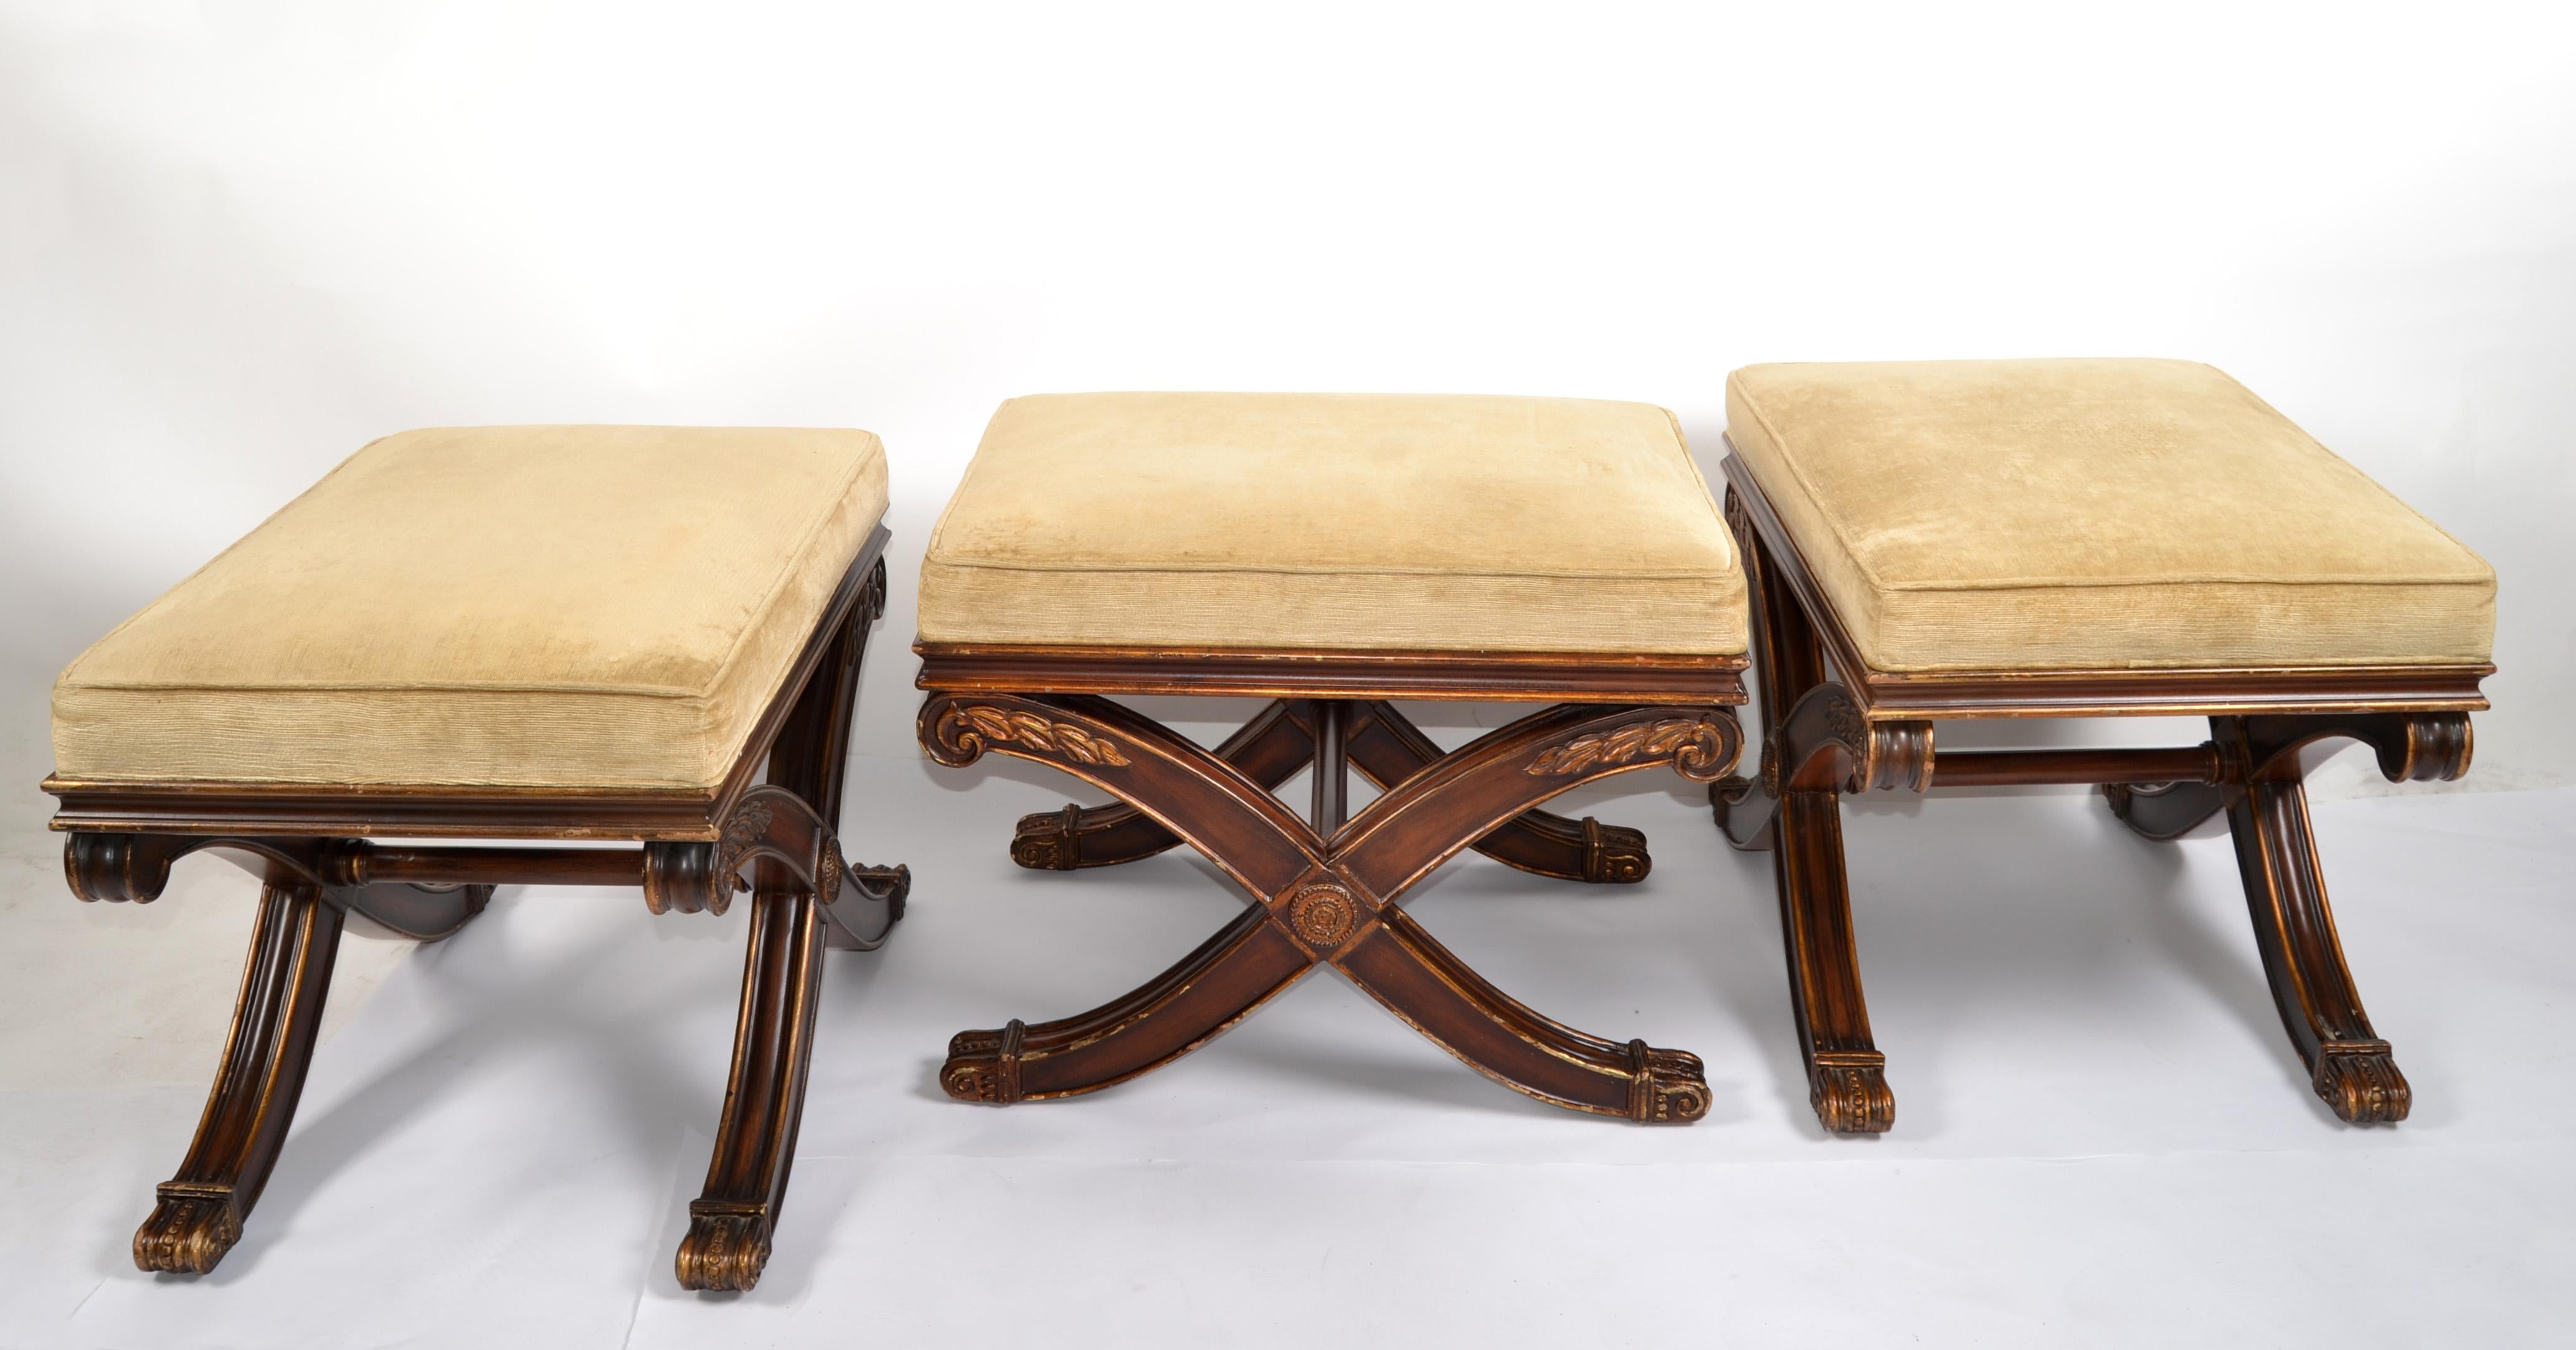 Neoclassical Revival 1 of 3 Neoclassical French Benches Stools Ottoman Regency X Based America For Sale